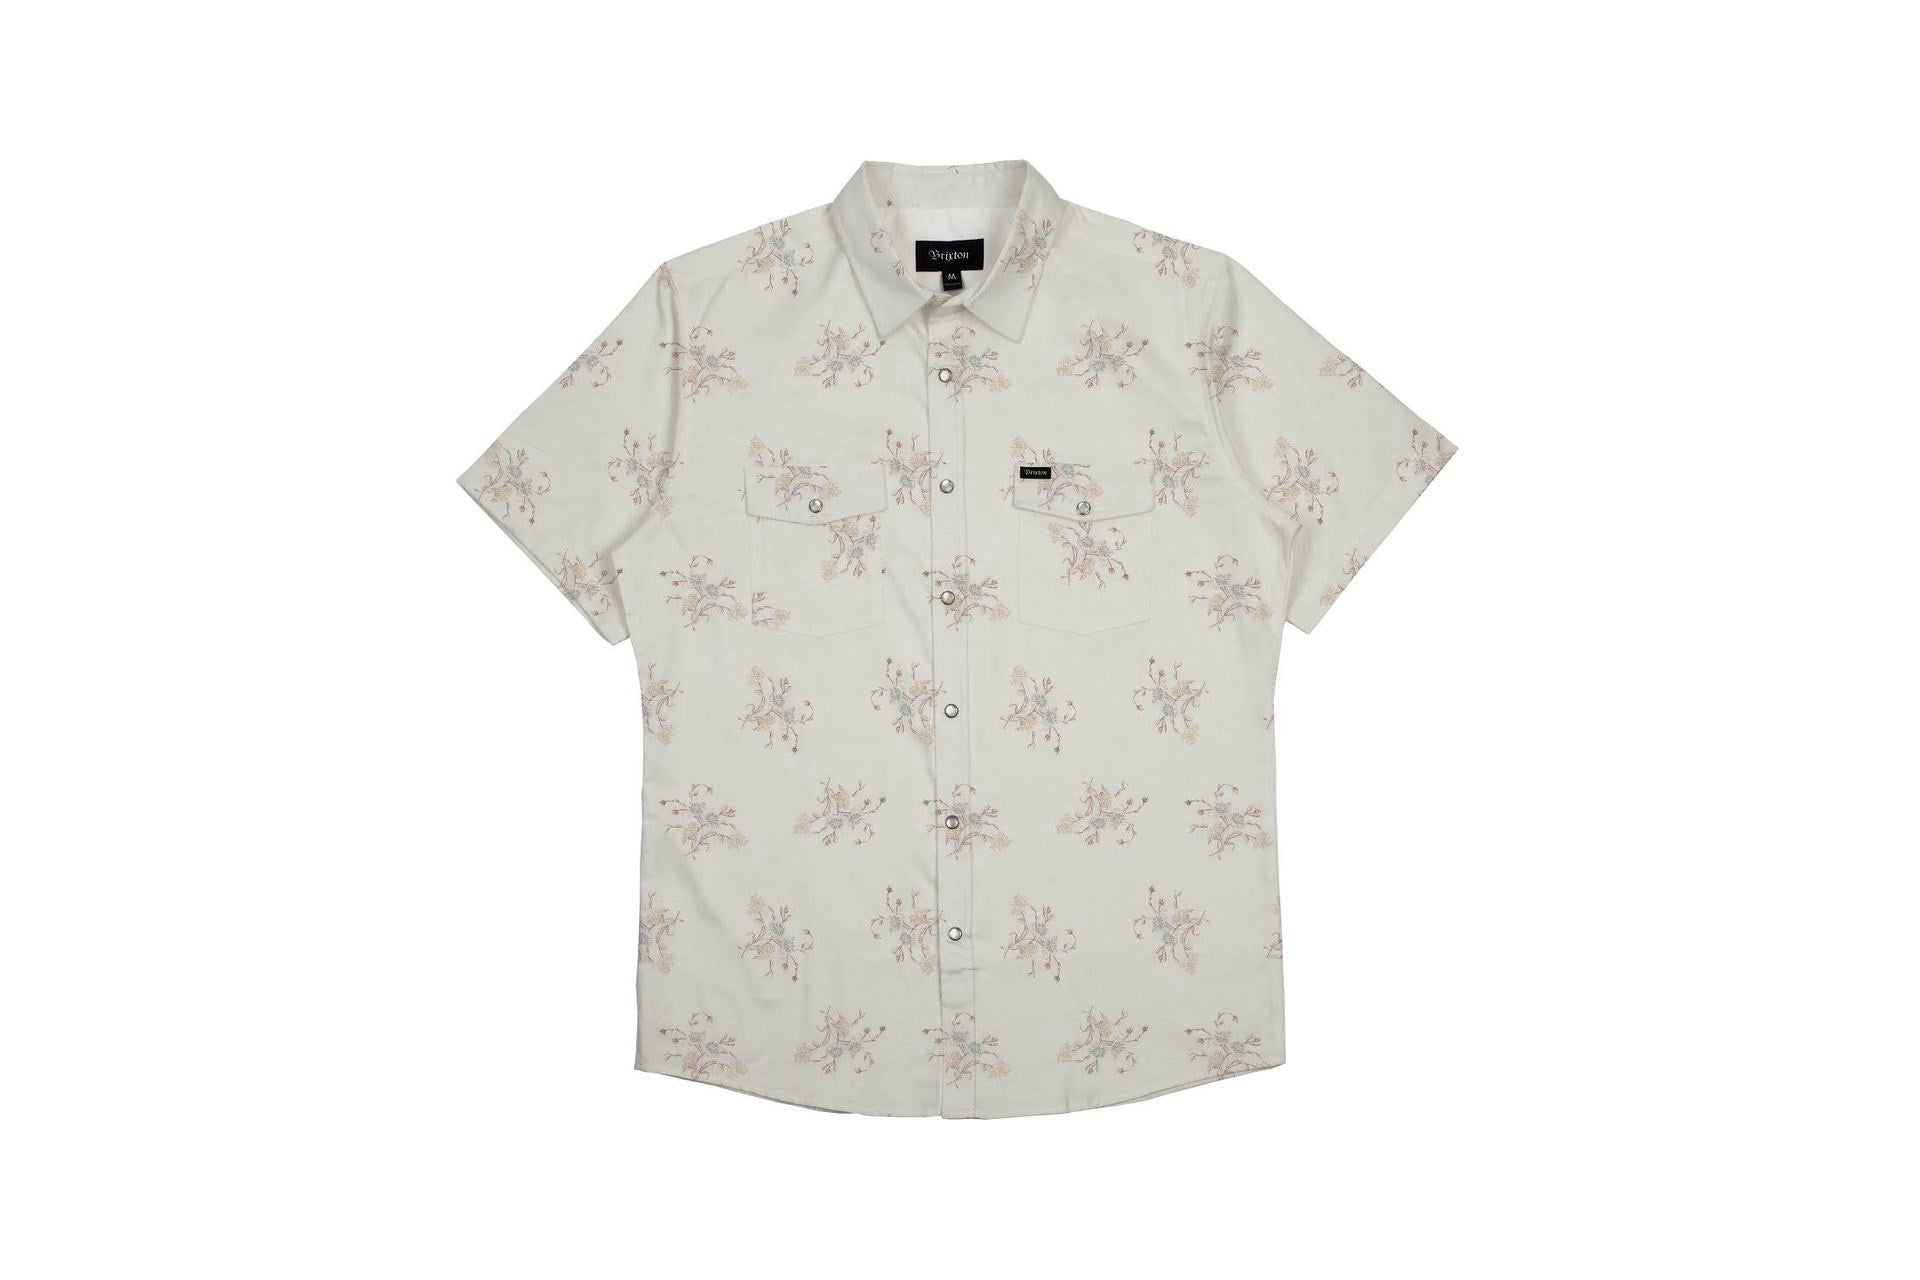 Get the latest Brixton Wayne SS Woven Shirt online at Roar Streetwear NZ. Free deliveries on orders over $100 stores at Whitianga, Whangamata, and Waihi Beach